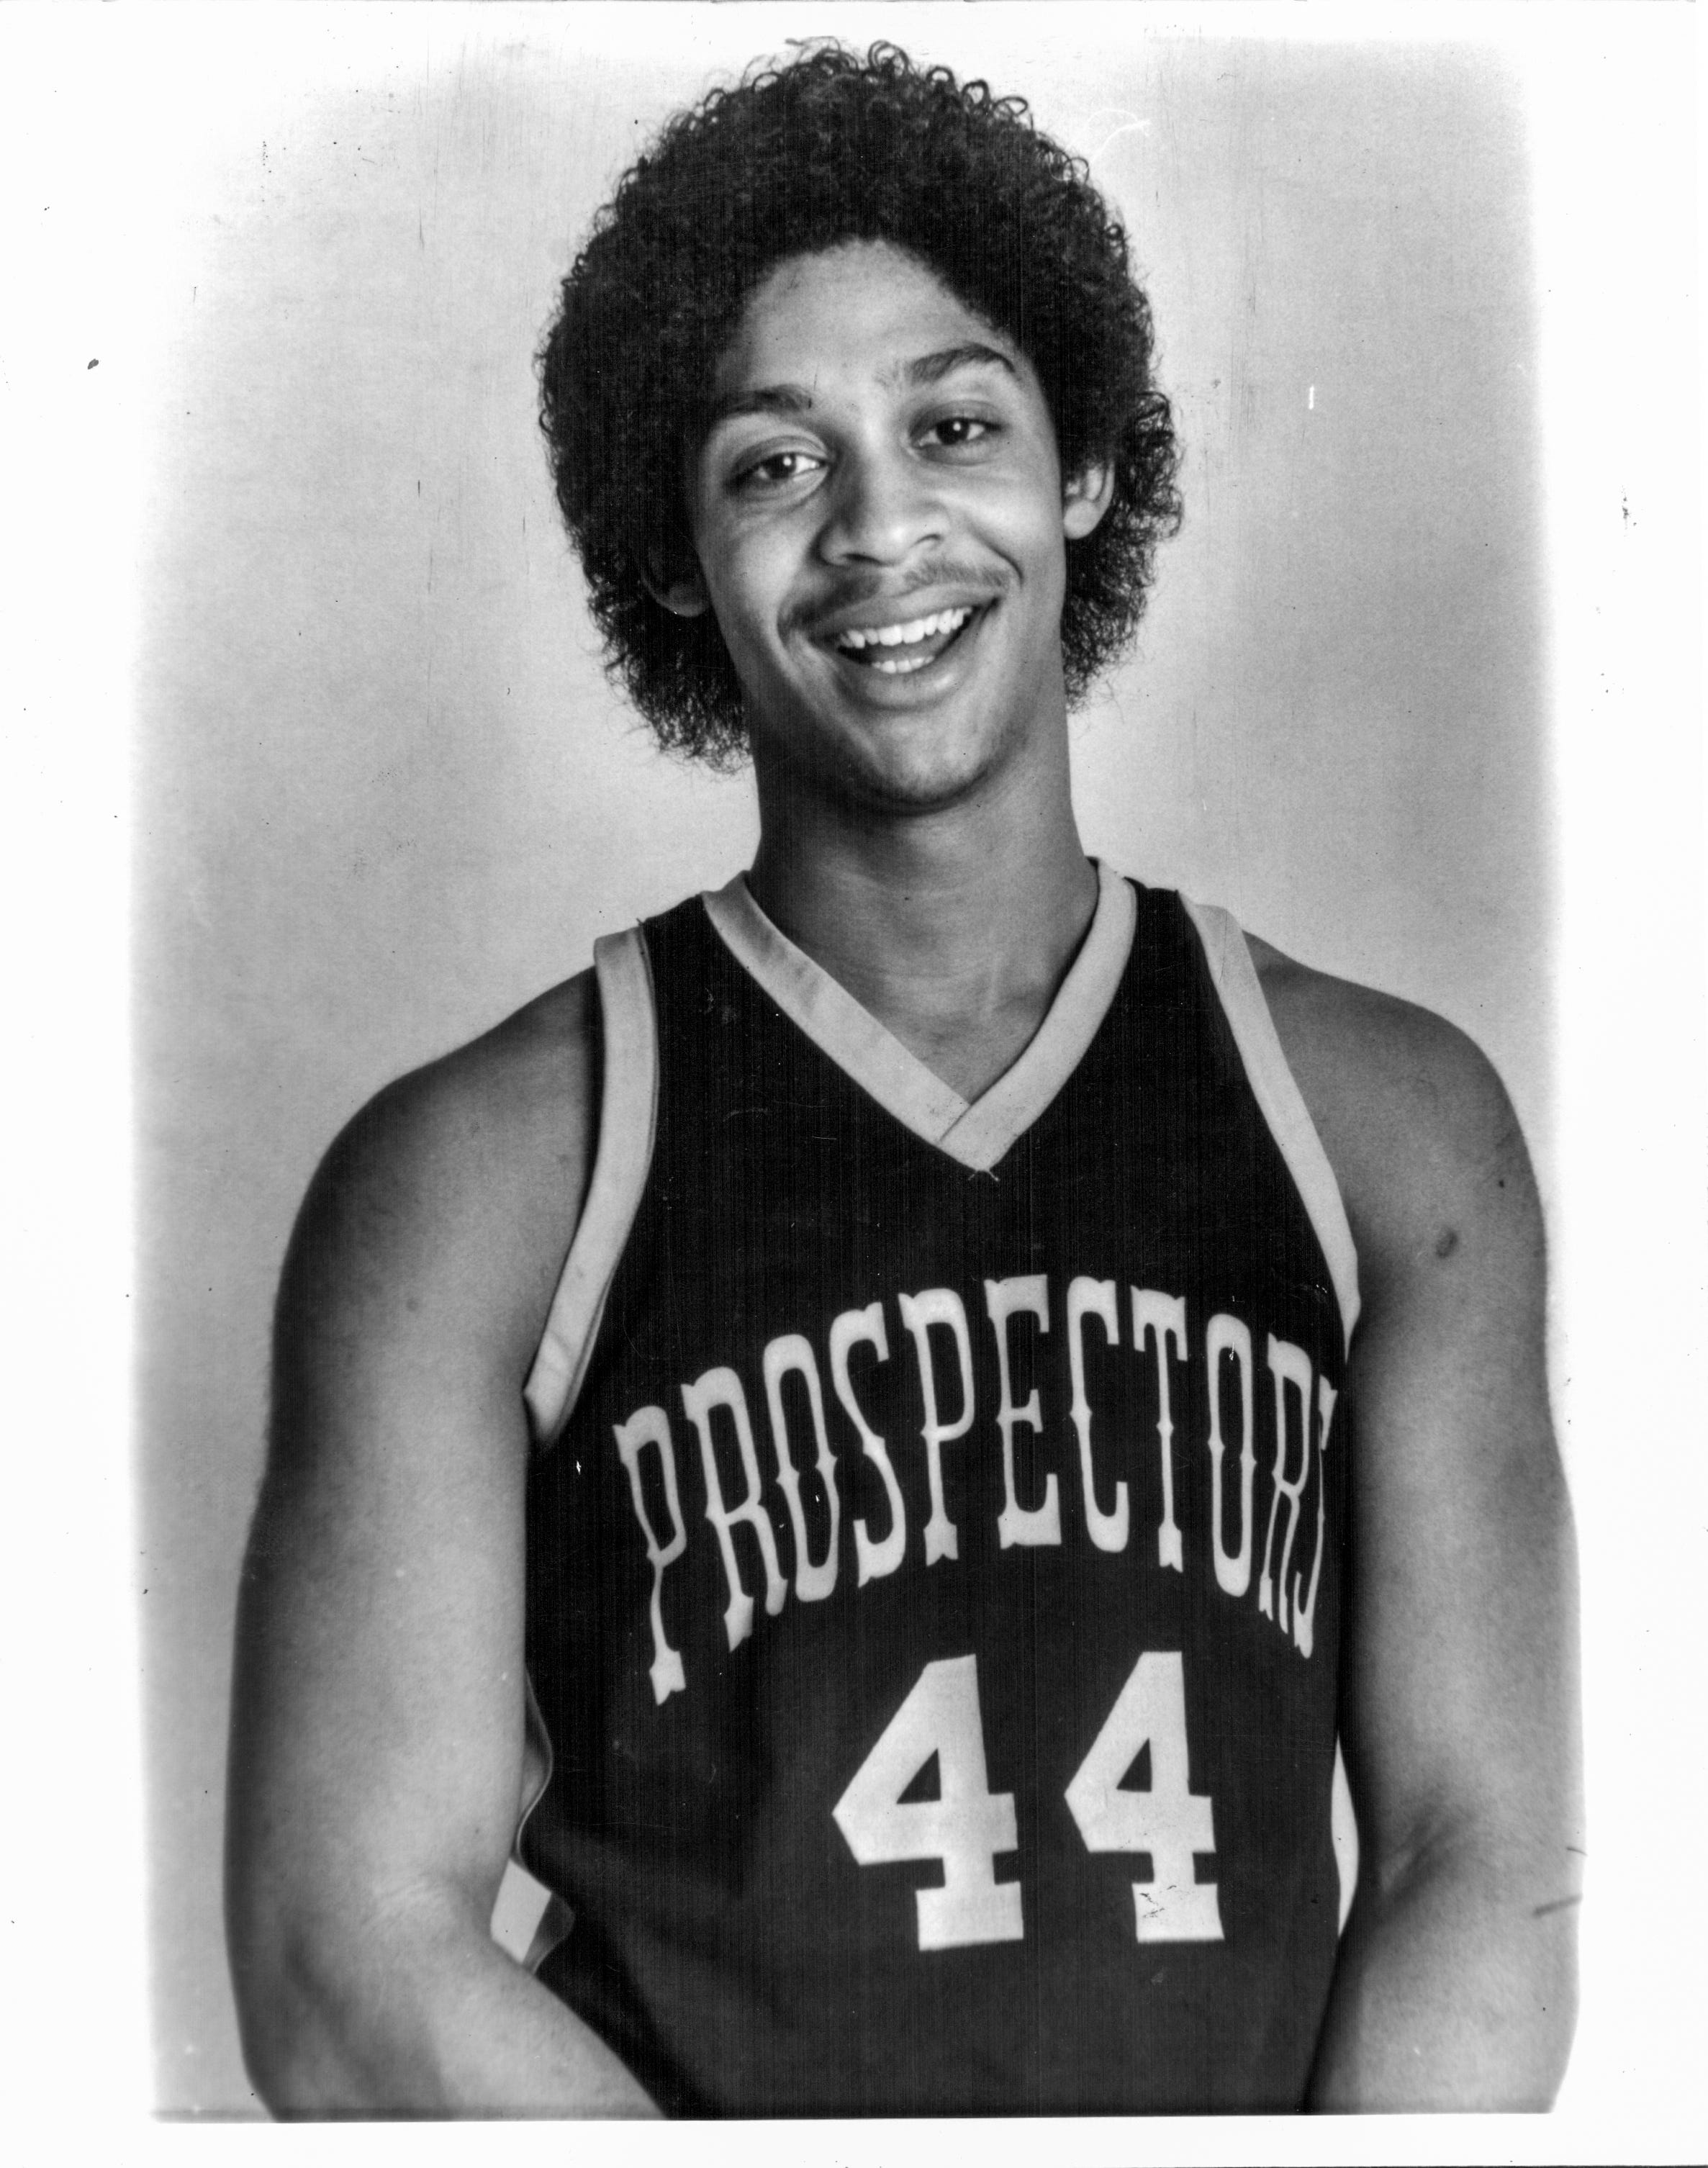 As a standout at Southwestern High School, Antoine "The Judge" Joubert was one of the most celebrated high school players in America. The 1983 Michigan Mr. Basketball winner and McDonald's All-American would play collegiately at the University of Michigan.